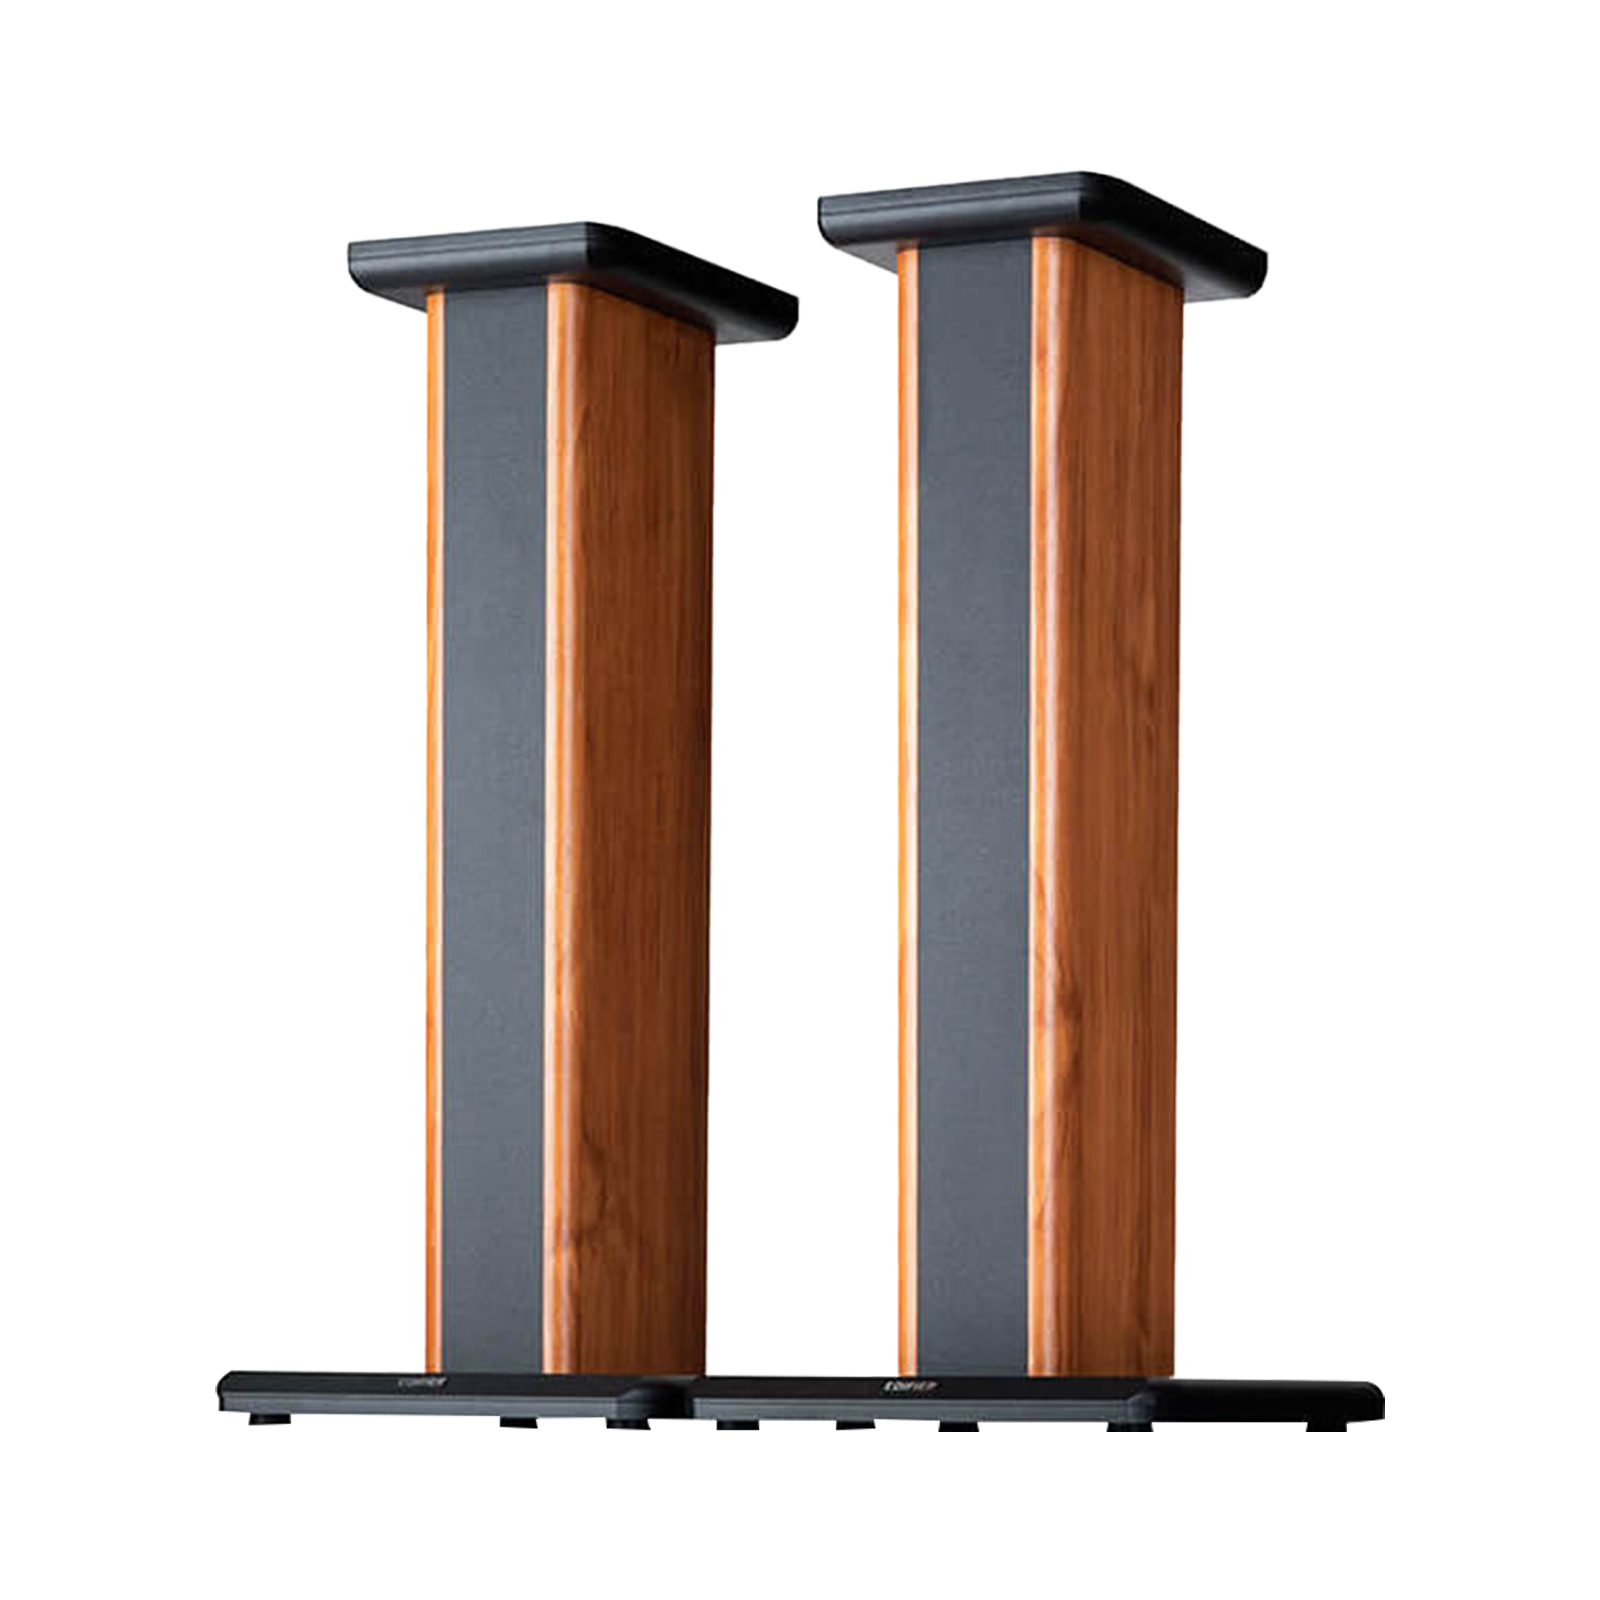 S2000PRO / S1000DB / S1000MKII / S1000W Stands Speaker Stands for S2000Pro / S1000DB / S1000MKII/S1000W -Pair